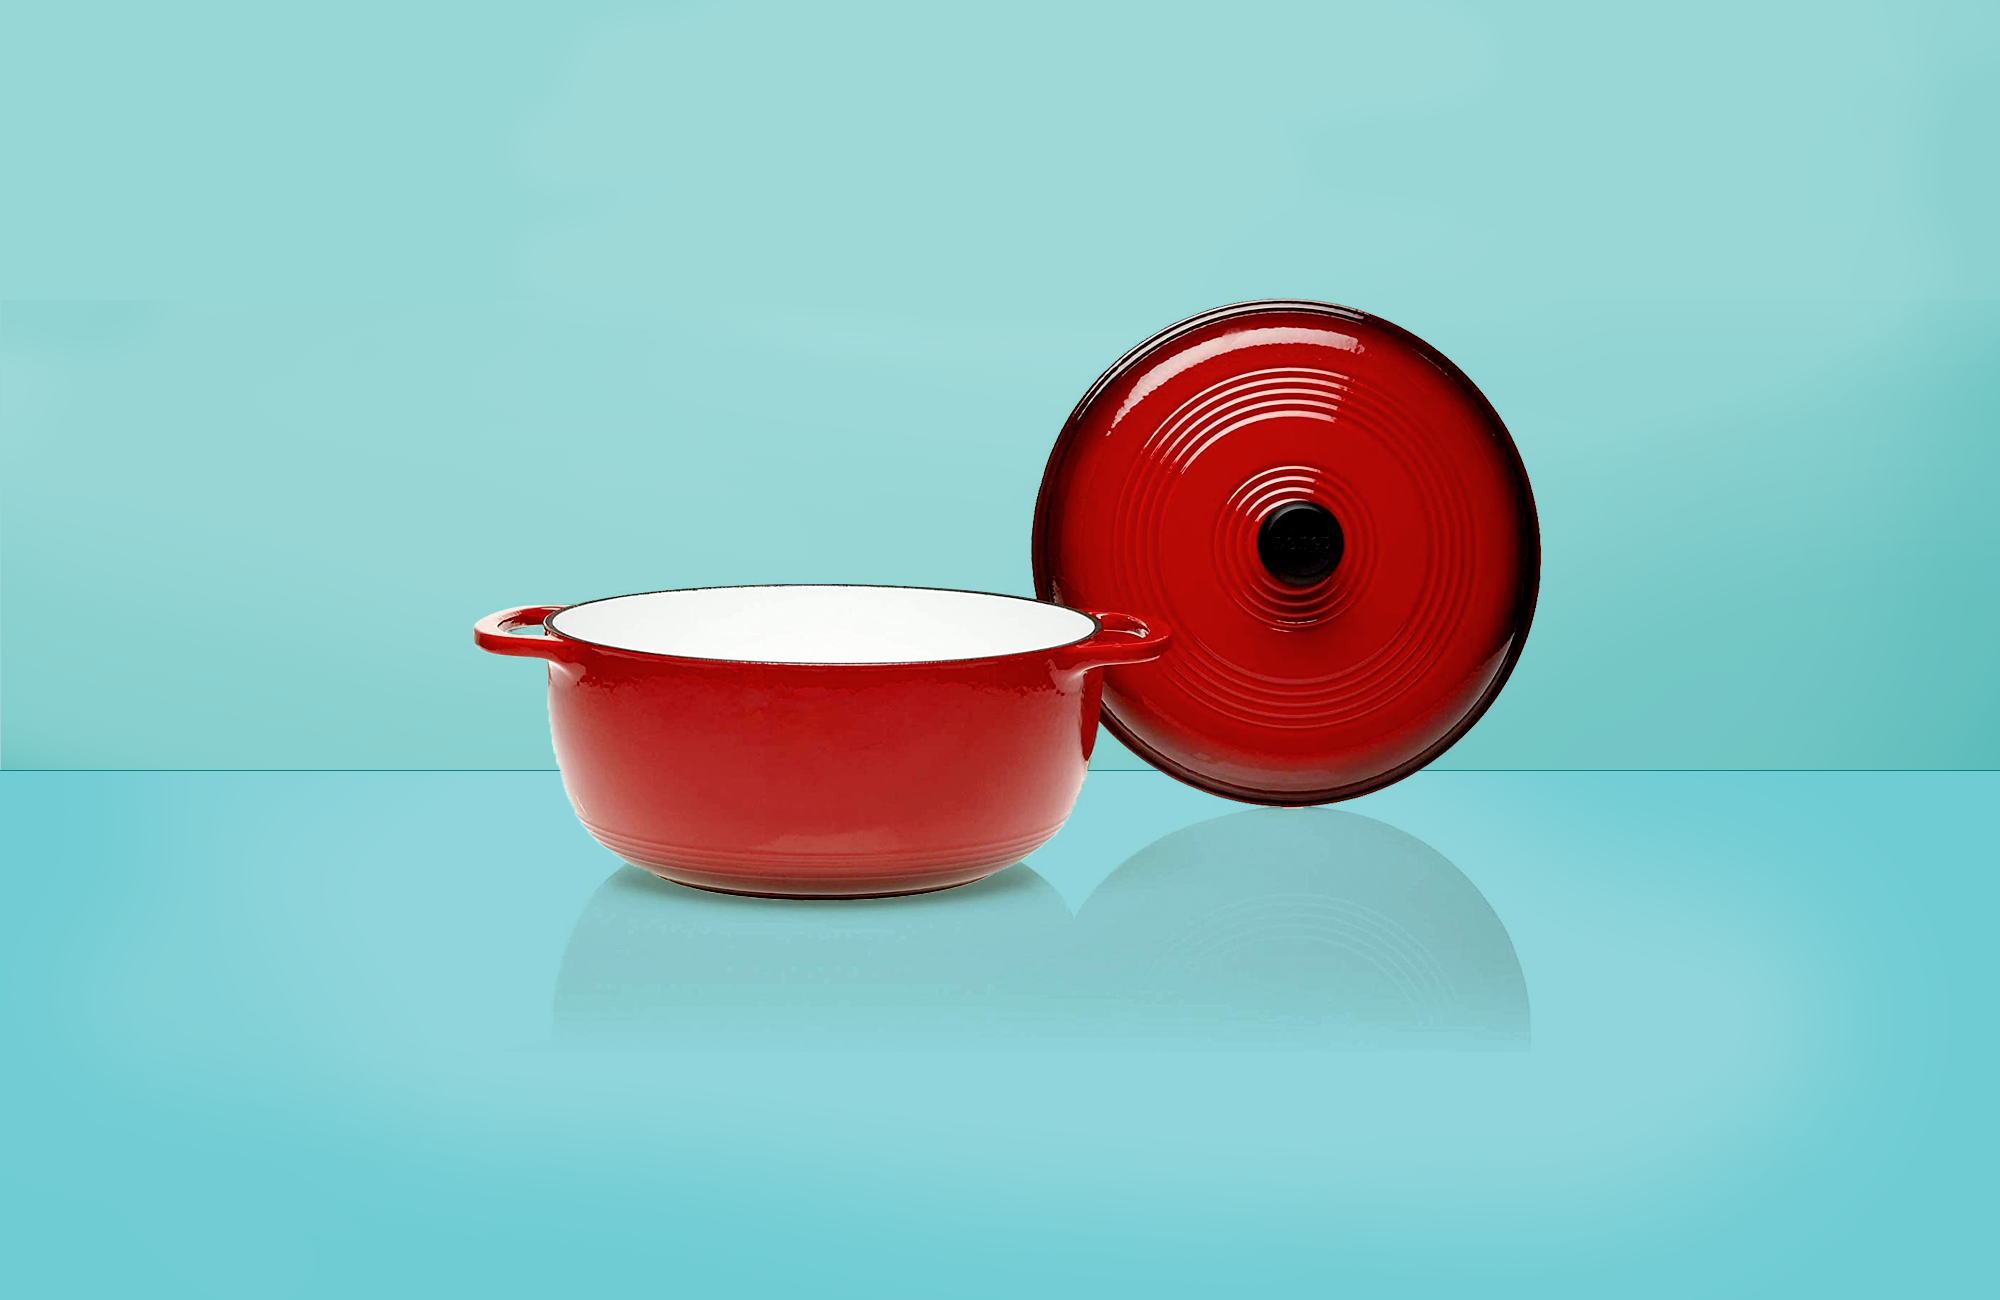 The Misen Dutch oven: Everything you need to know